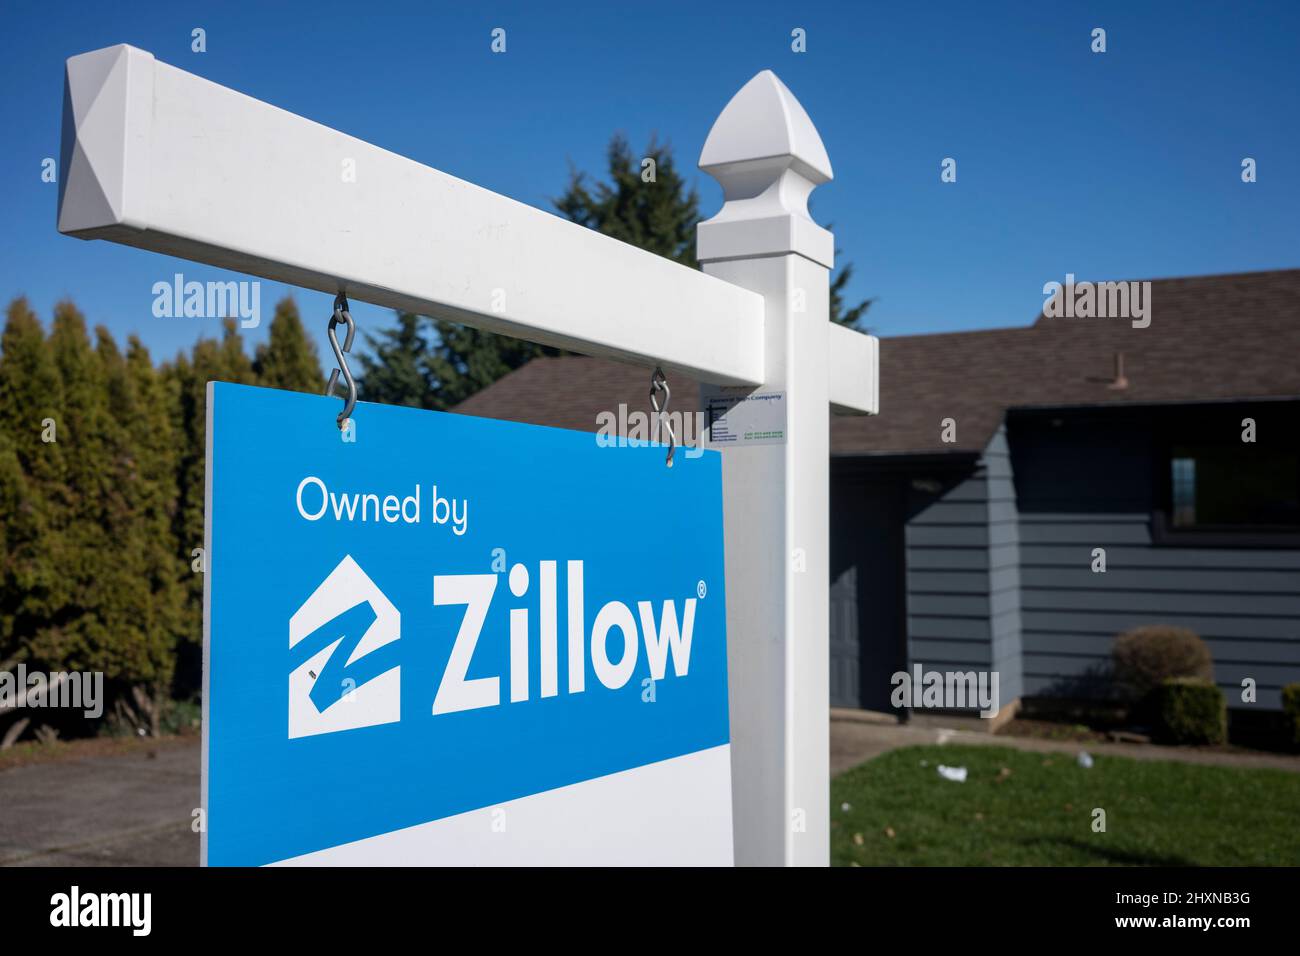 A single-family house owned by Zillow is seen for sale in southwest Portland, Oregon, on Friday, February 25, 2022. Zillow exited its iBuyer business... Stock Photo